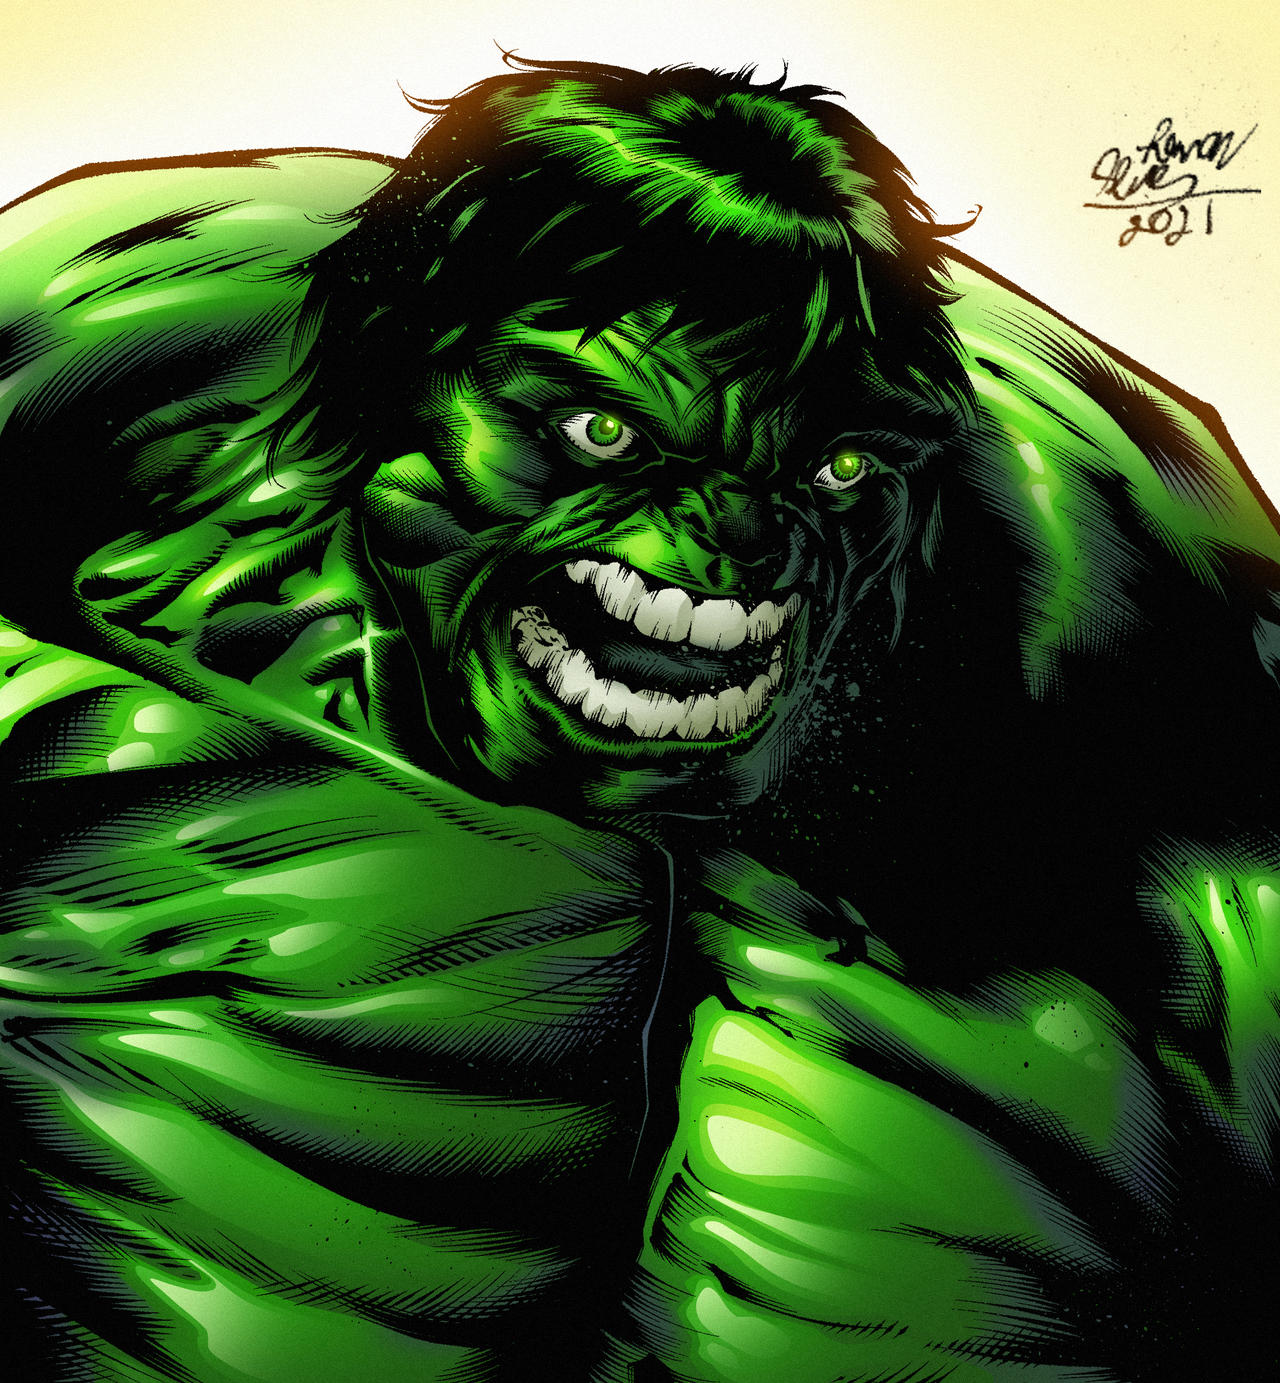 The Incredible Hulk (from the old movie) by Aloneinthedarkart on DeviantArt